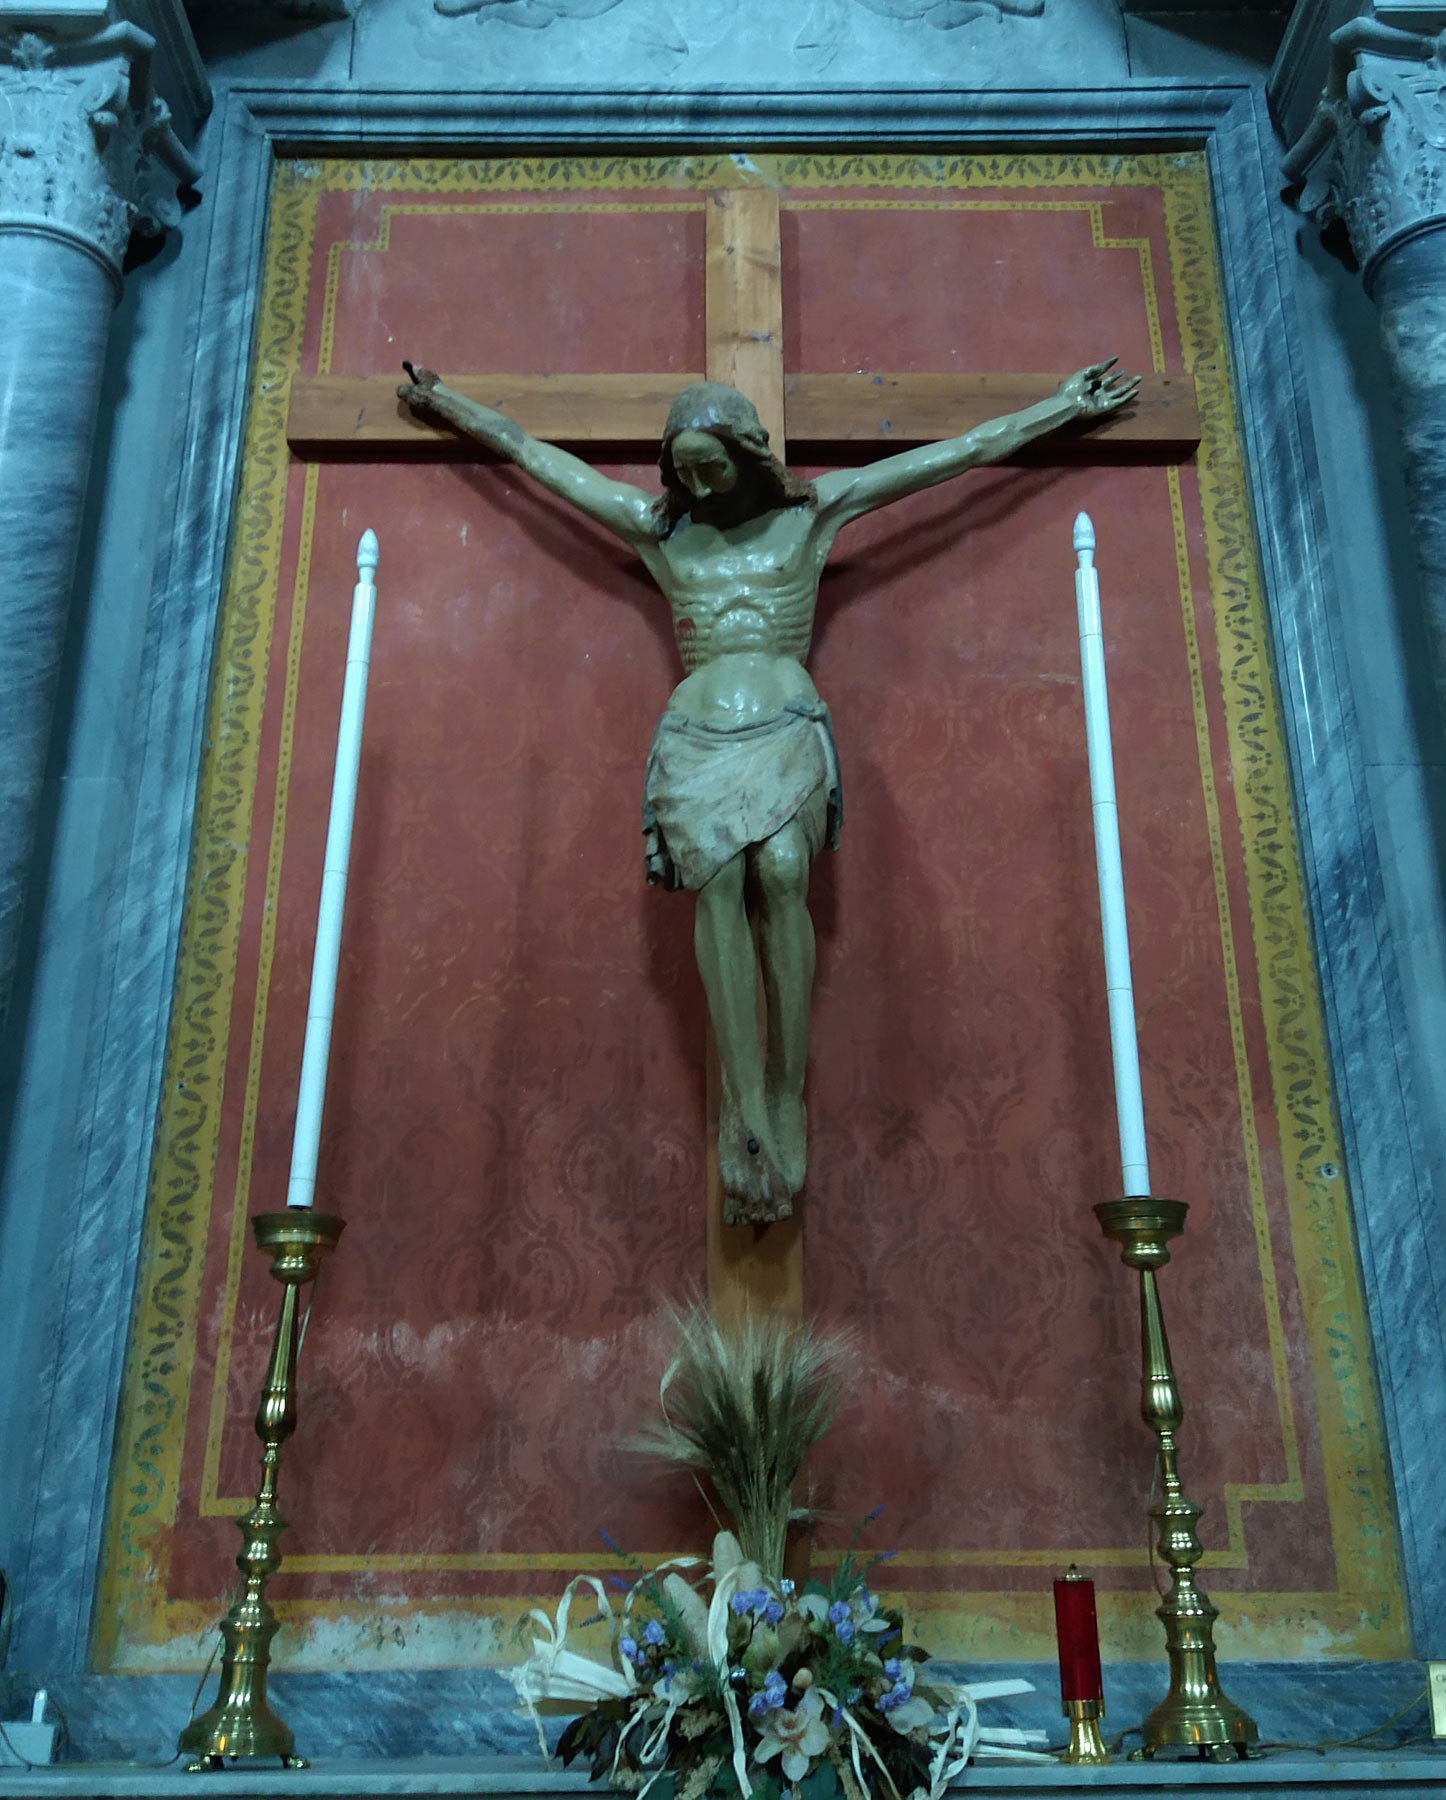 The wooden crucifix